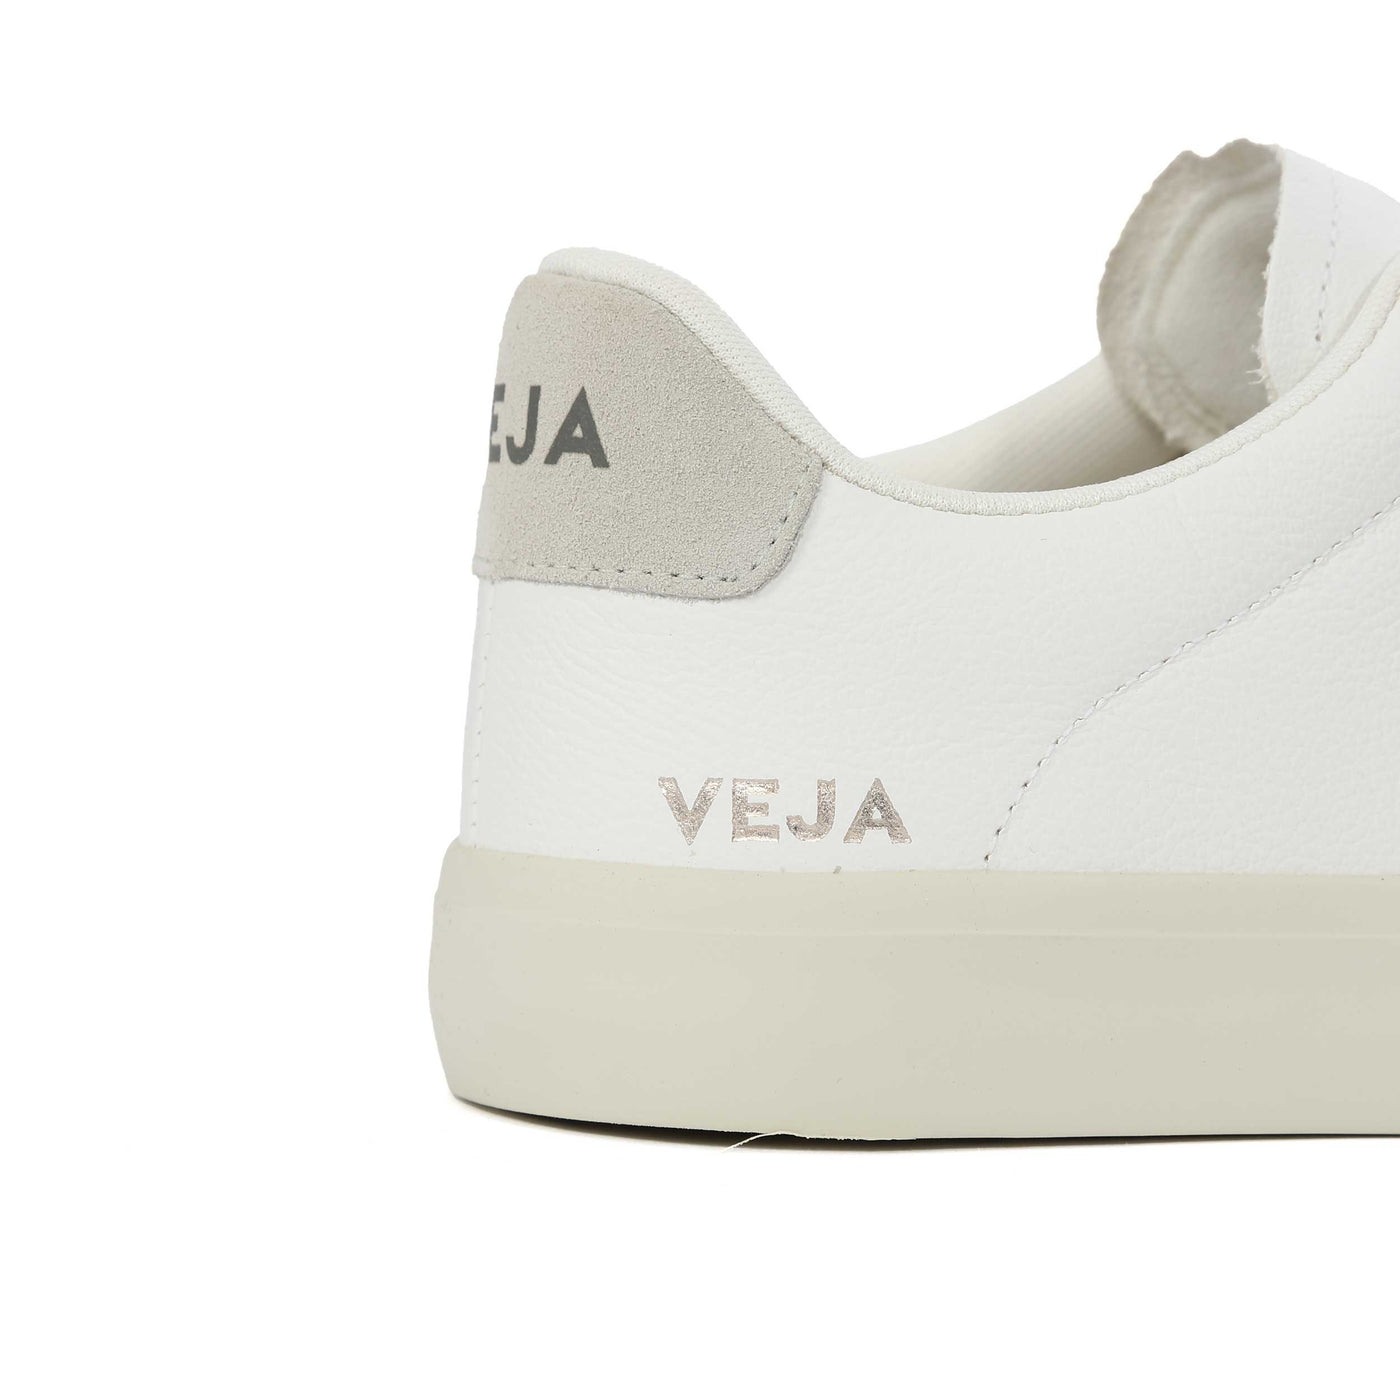 Veja Campo Trainer in Extra White & Natural Suede Branding